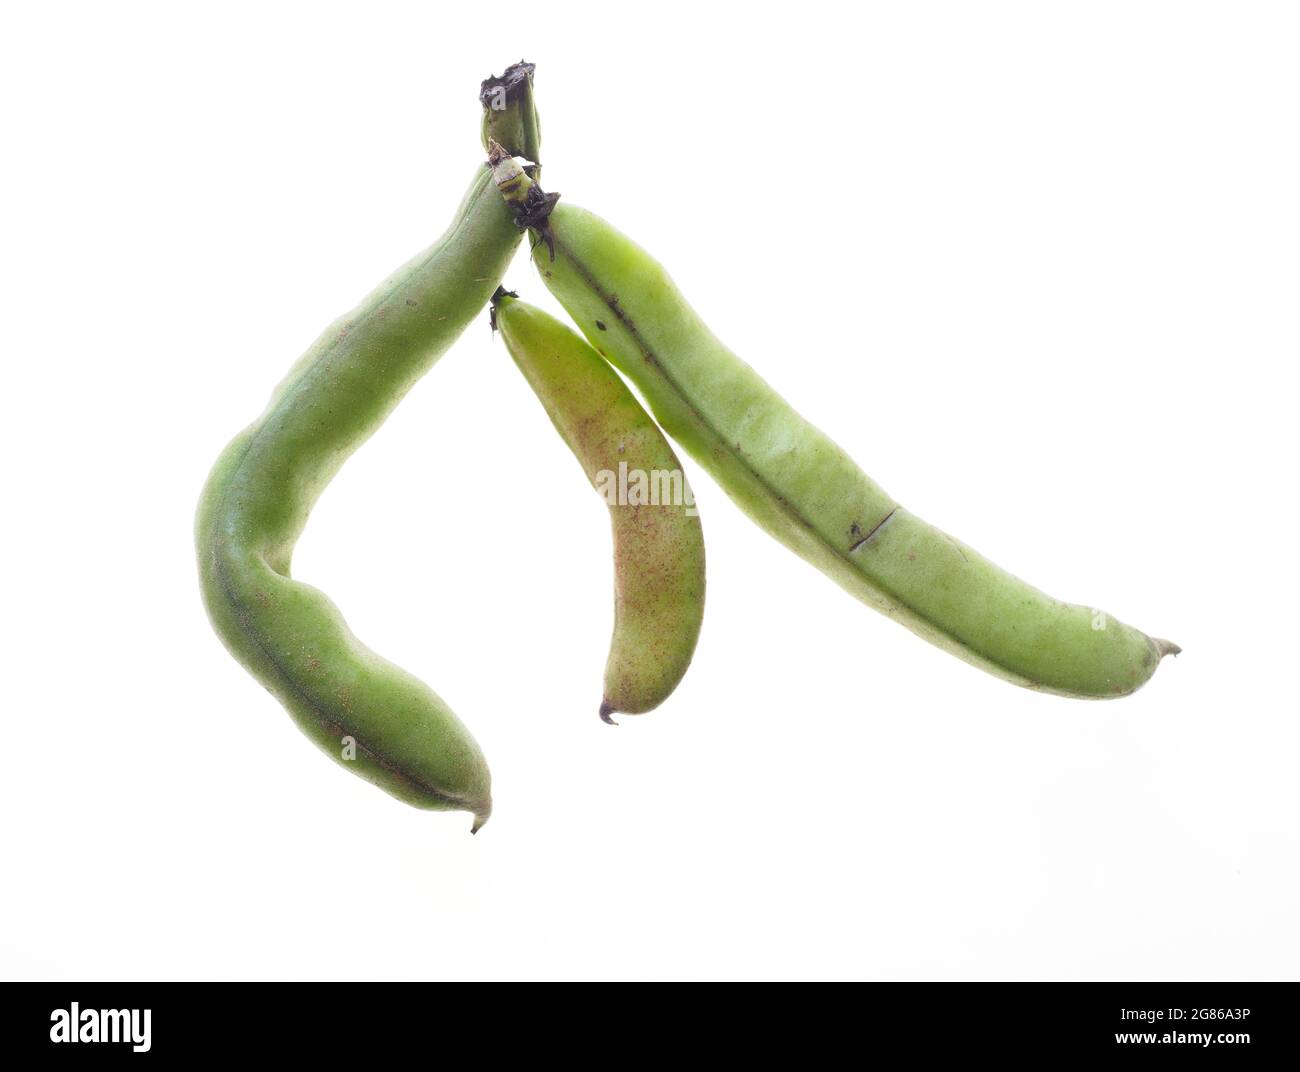 A close-up of some home-grown broad bean pods against a white background Stock Photo